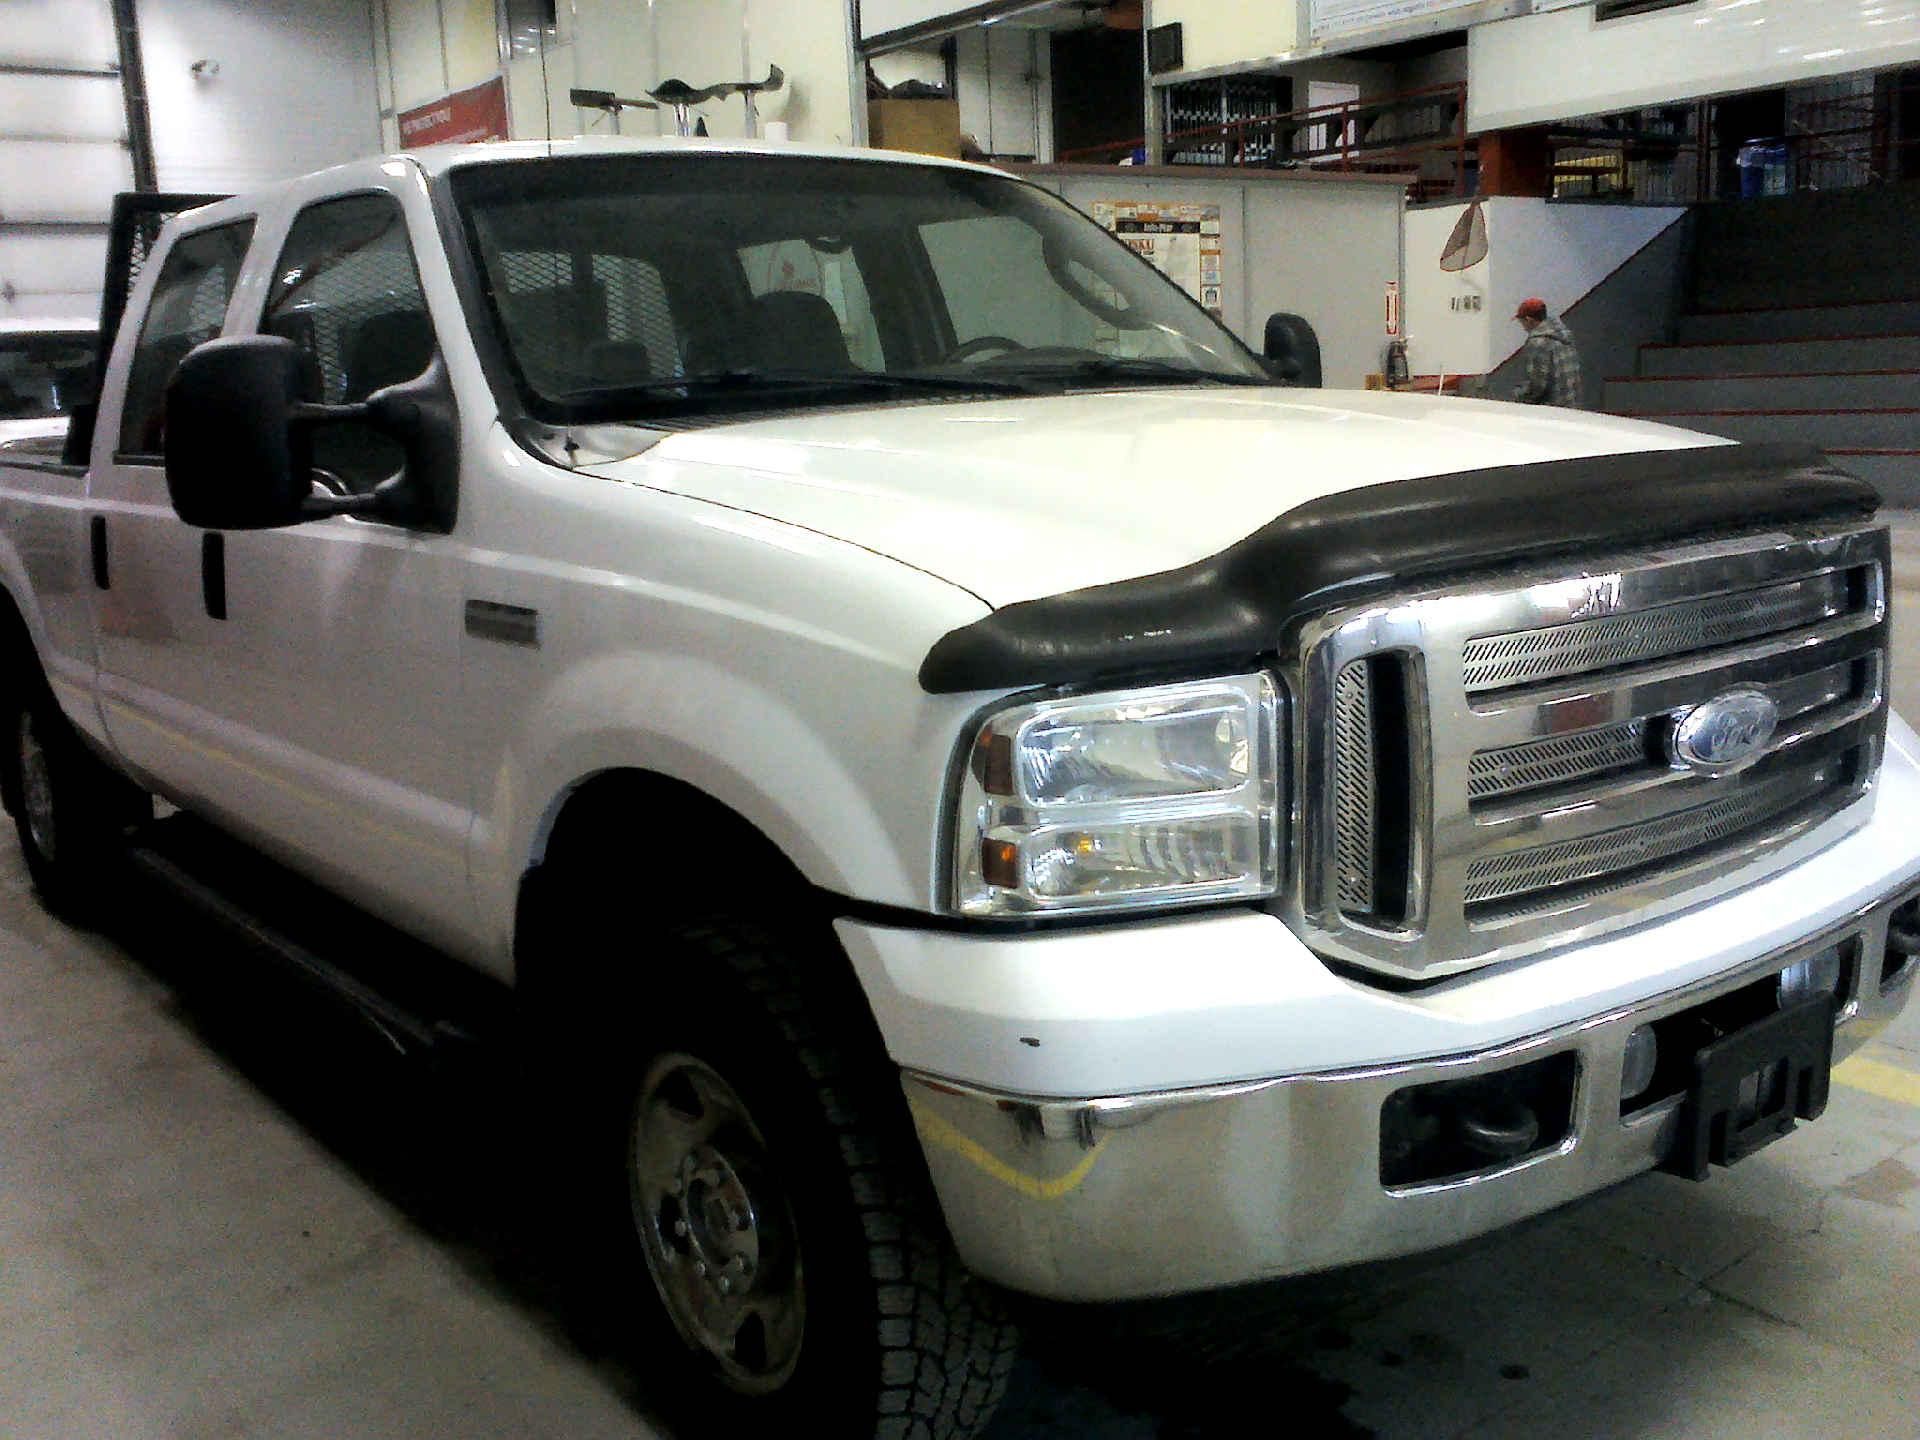 2006 FORD F-250 SD XLT CREW CAB 4WD 5.4L V8 SOHC 16V AUTOMATIC SN:1FTSW21556ED34193 OPTIONS:AC TW CC - Image 3 of 10